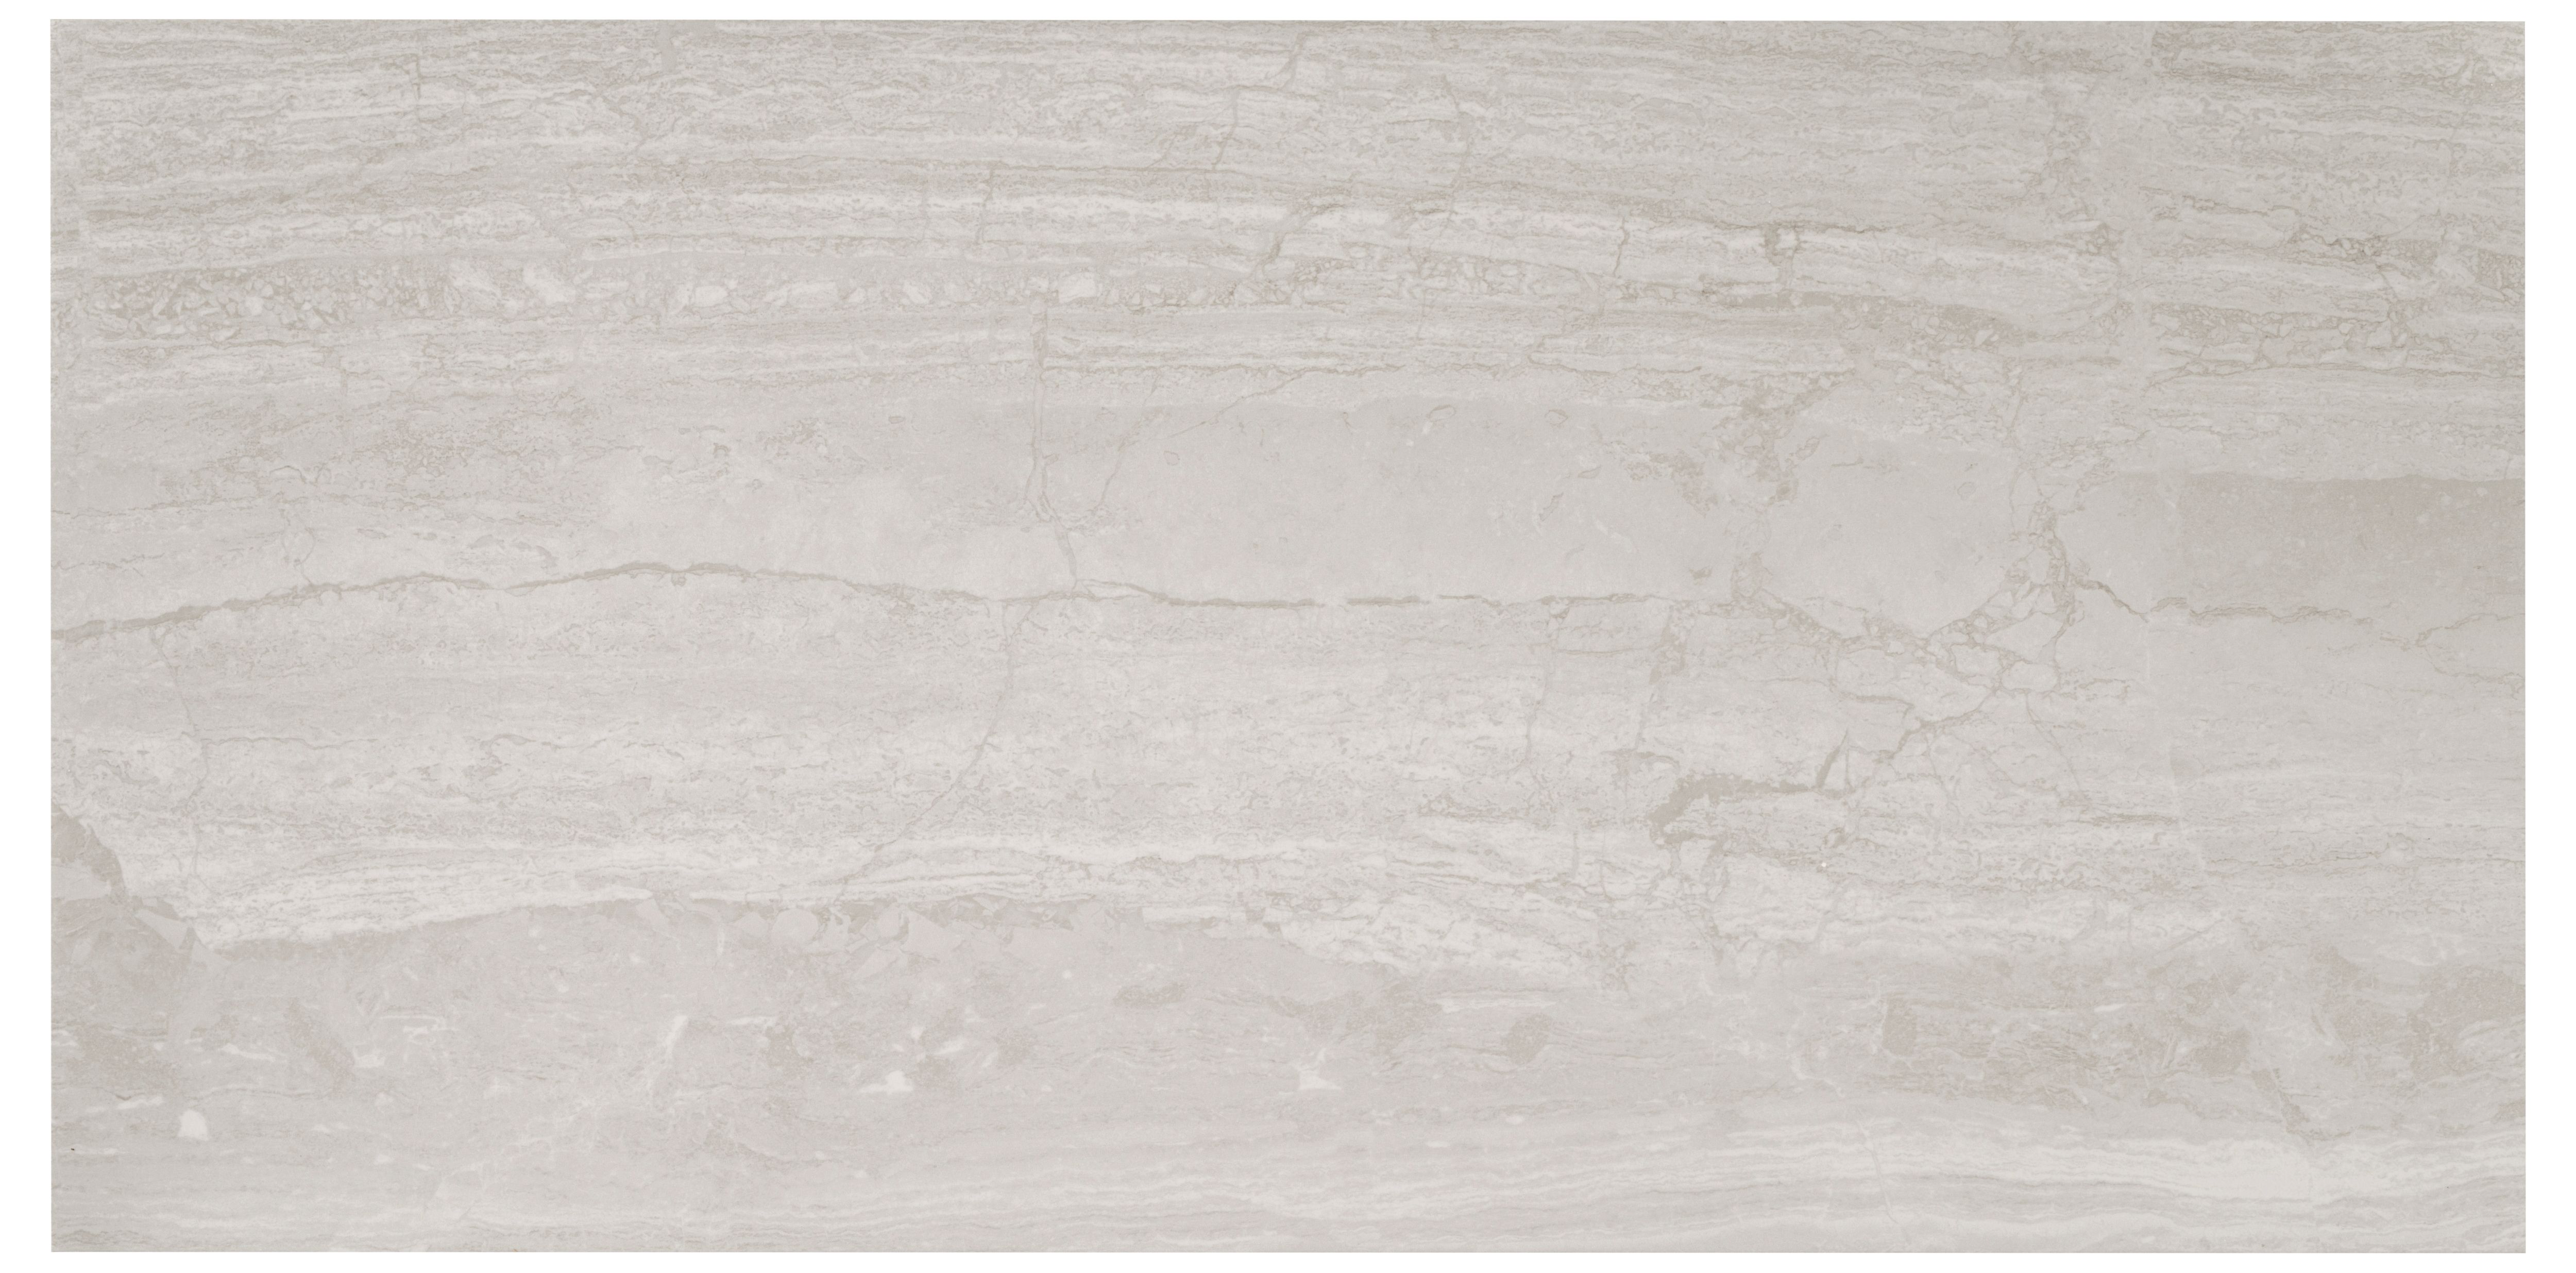 Image of Wickes Olympia™ Grey Polished Stone Porcelain Wall & Floor Tile - 600 x 300mm - Sample